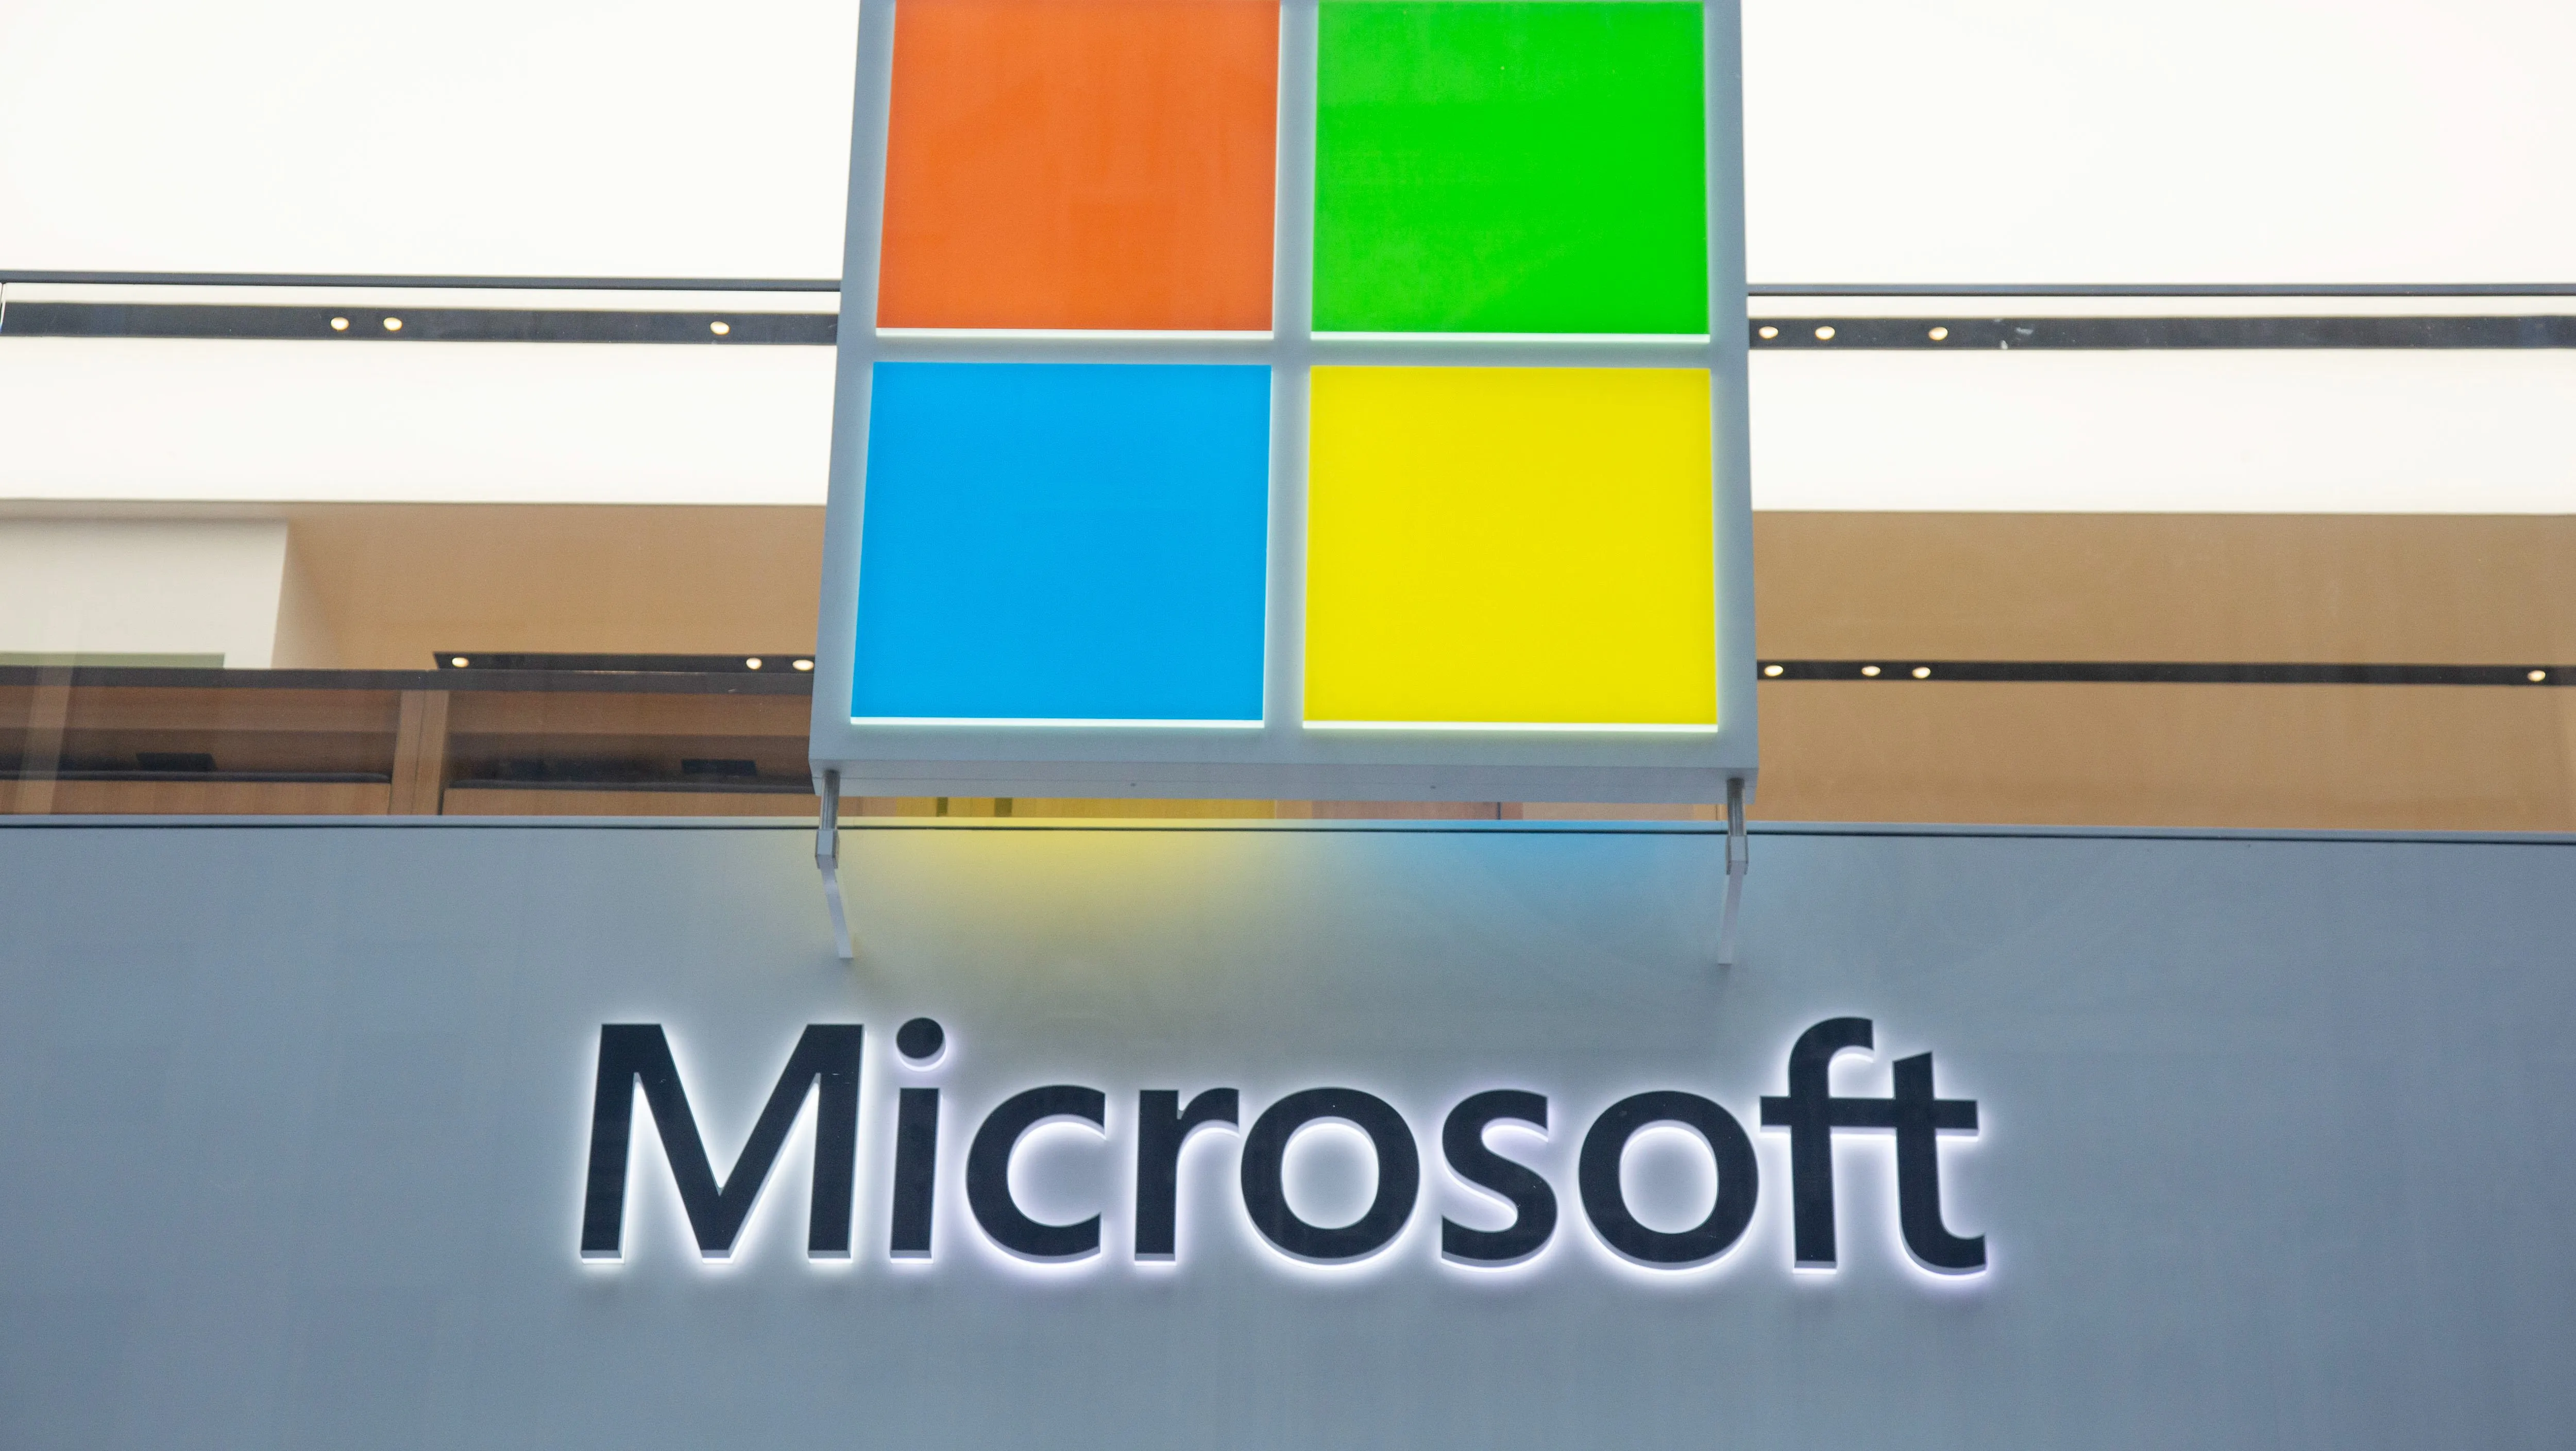 A Microsoft store entrance with the company’s logo